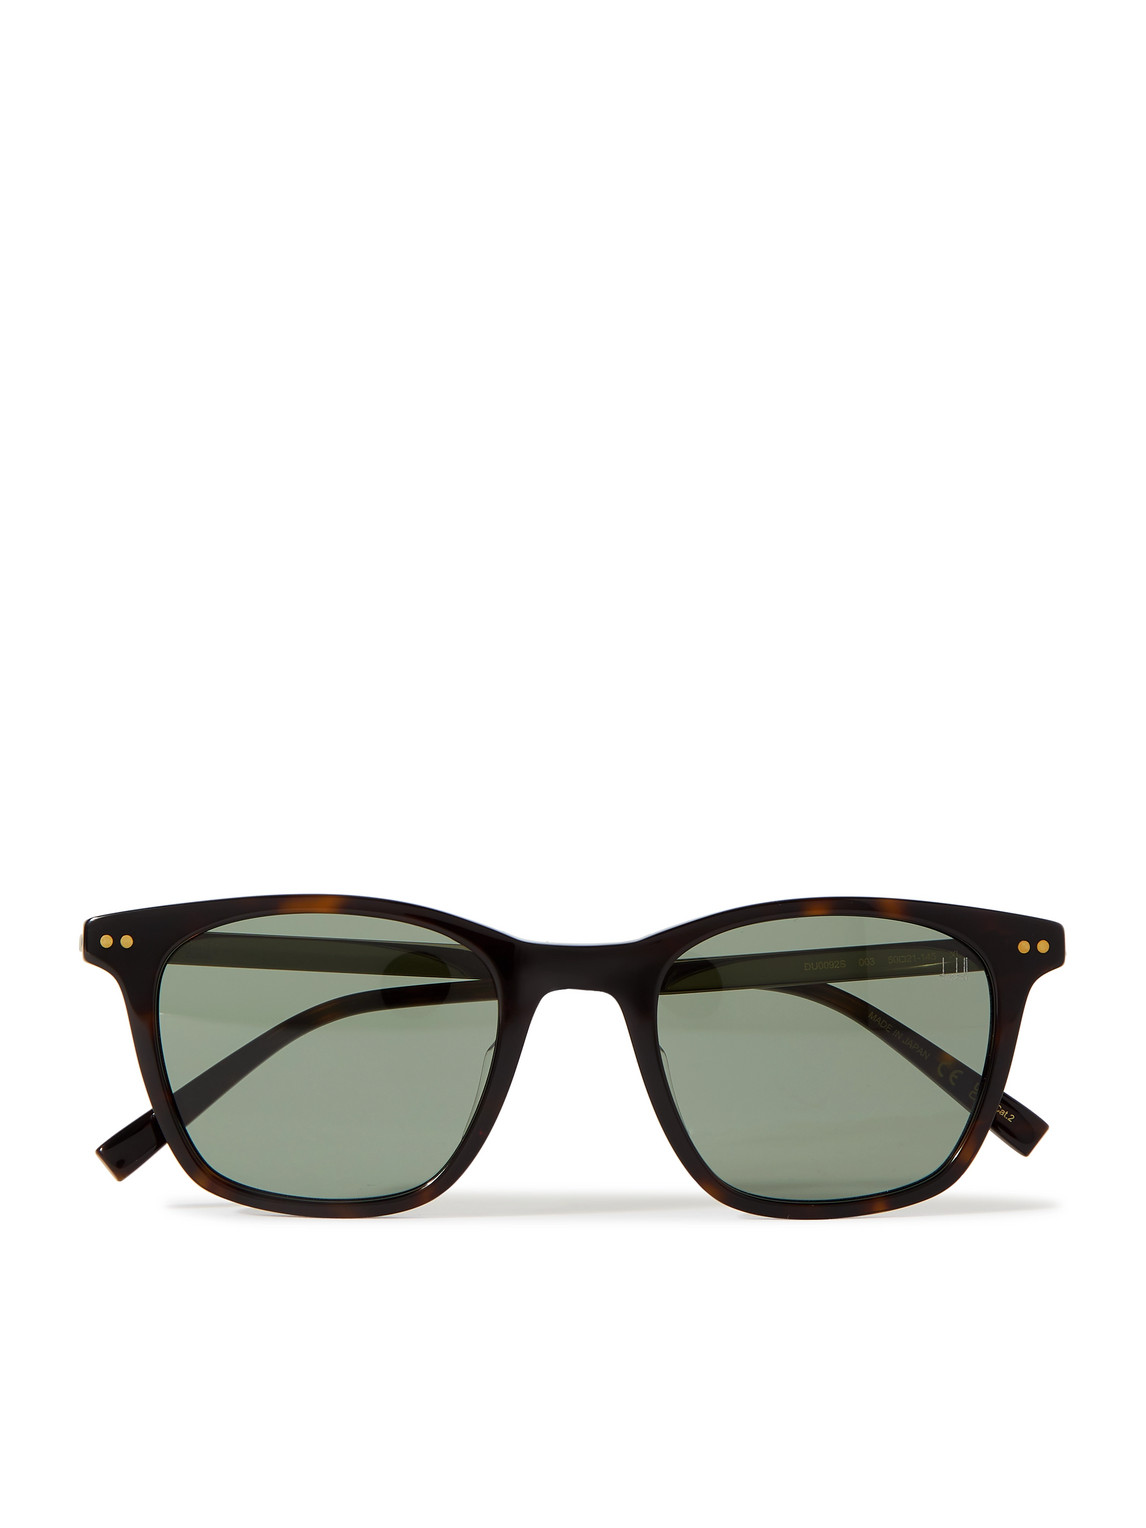 Dunhill Square-frame Tortoiseshell Acetate And Gold-tone Sunglasses In Grey